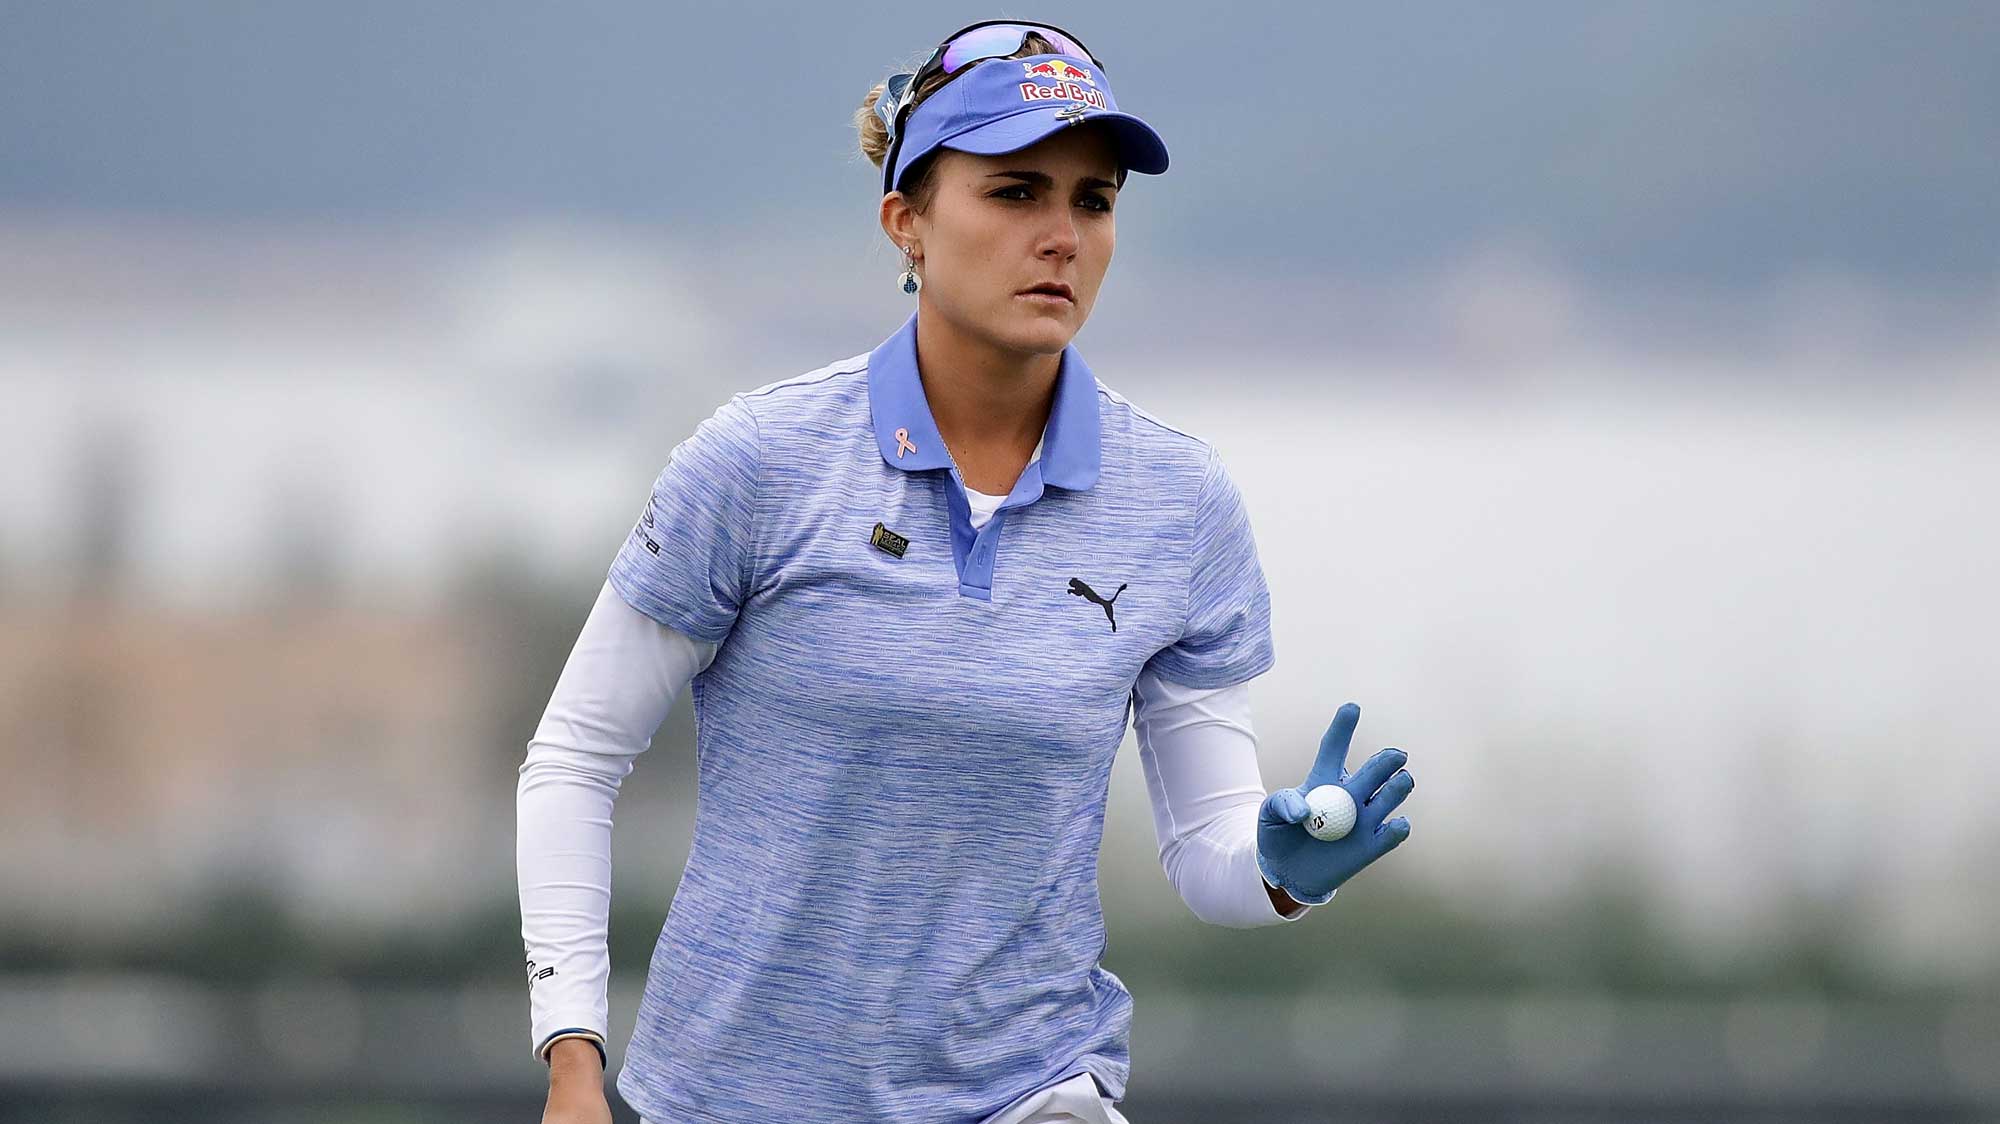 Lexi Thompson of United States reacts after a putt on the 6th hole during the first round of the LPGA KEB Hana Bank Championship